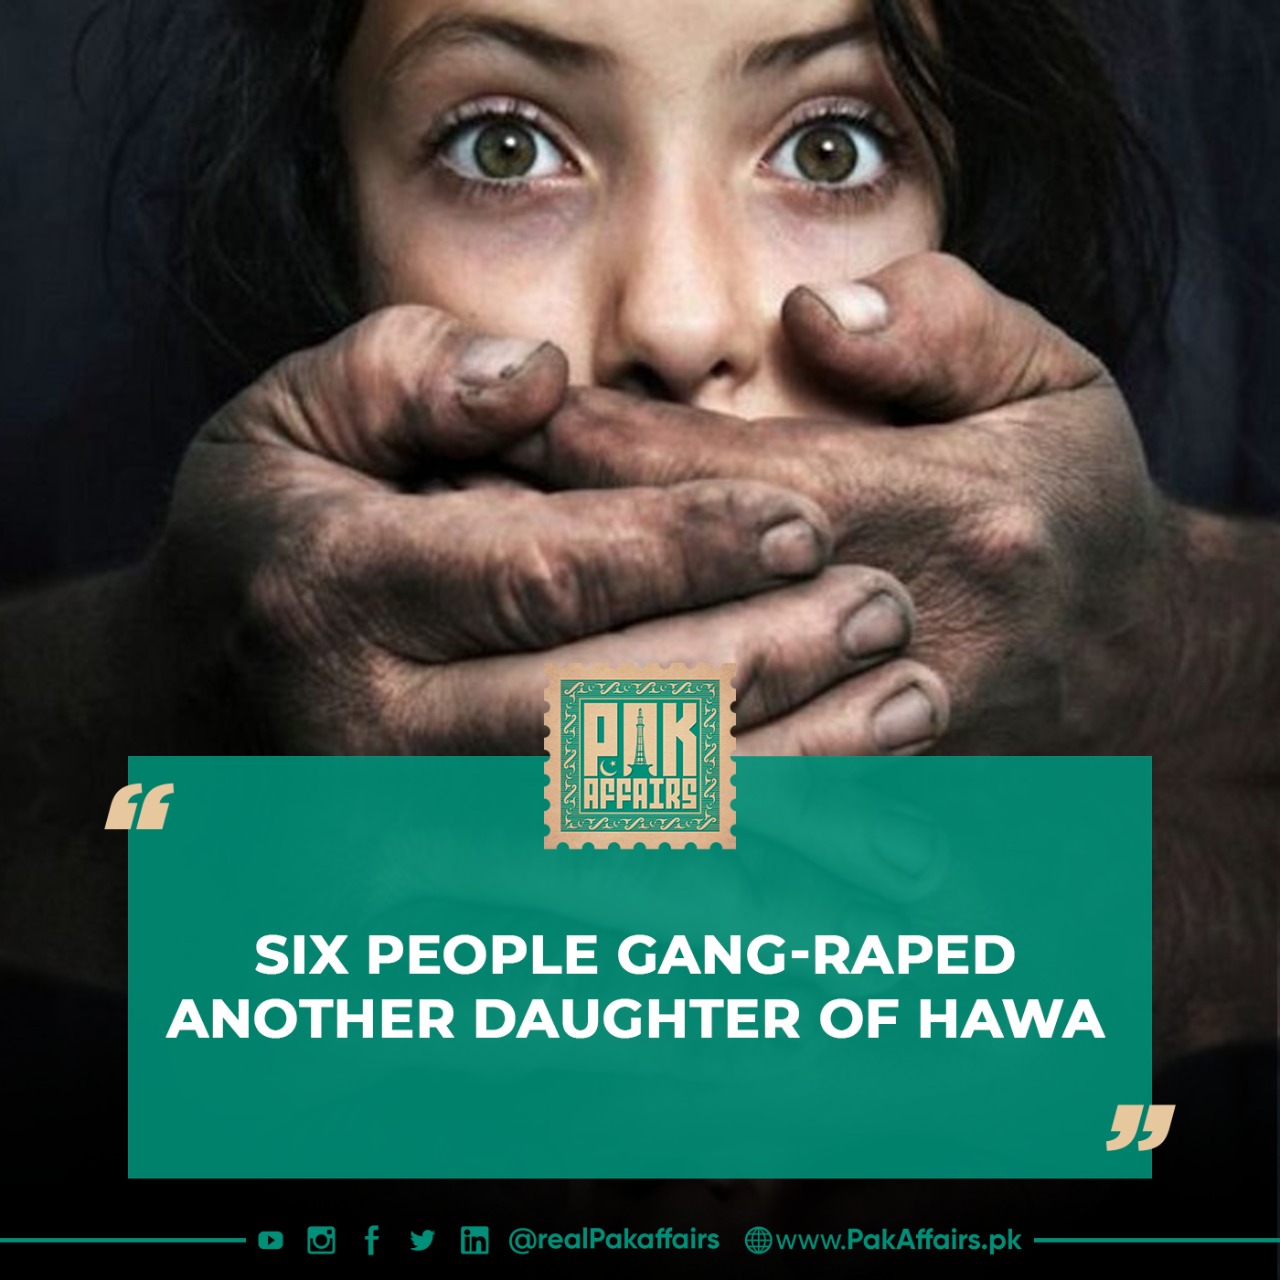 Six people gang-raped another daughter of Hawa.